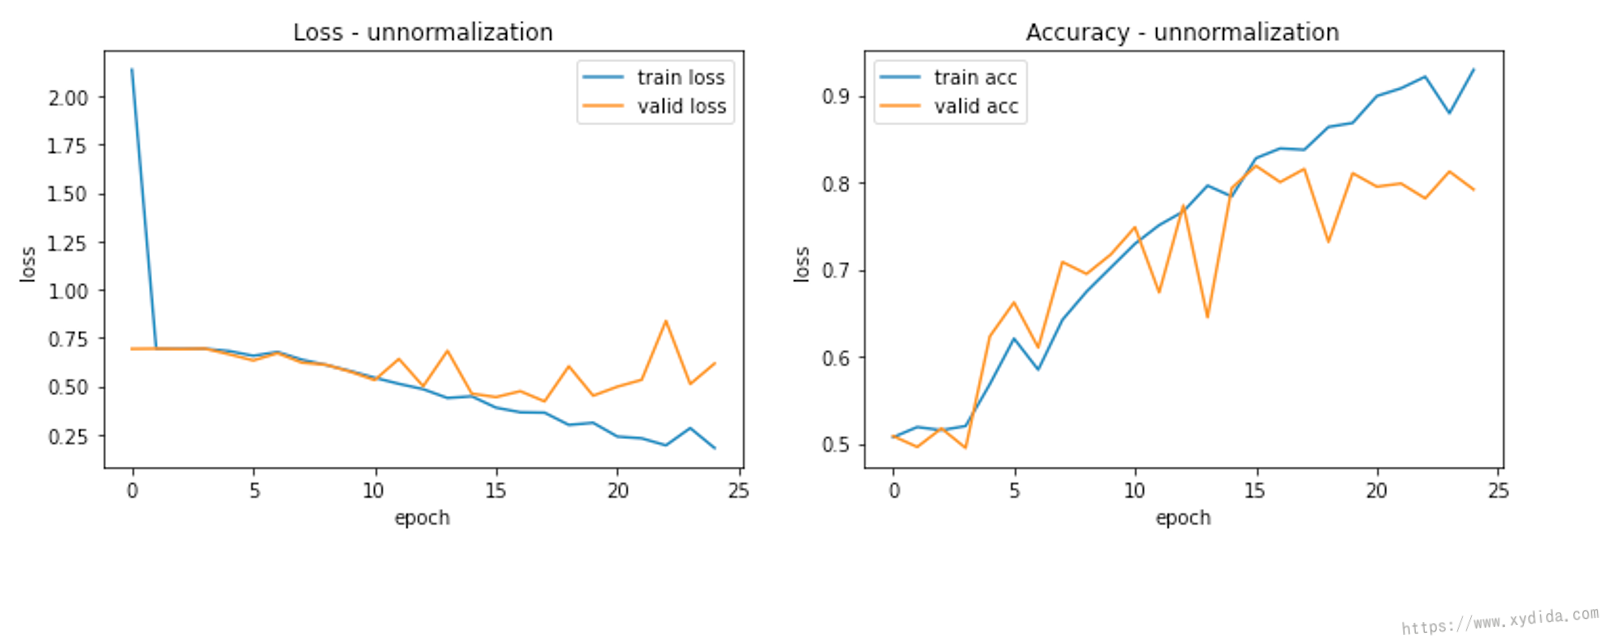 Loss and accuracy without normalization